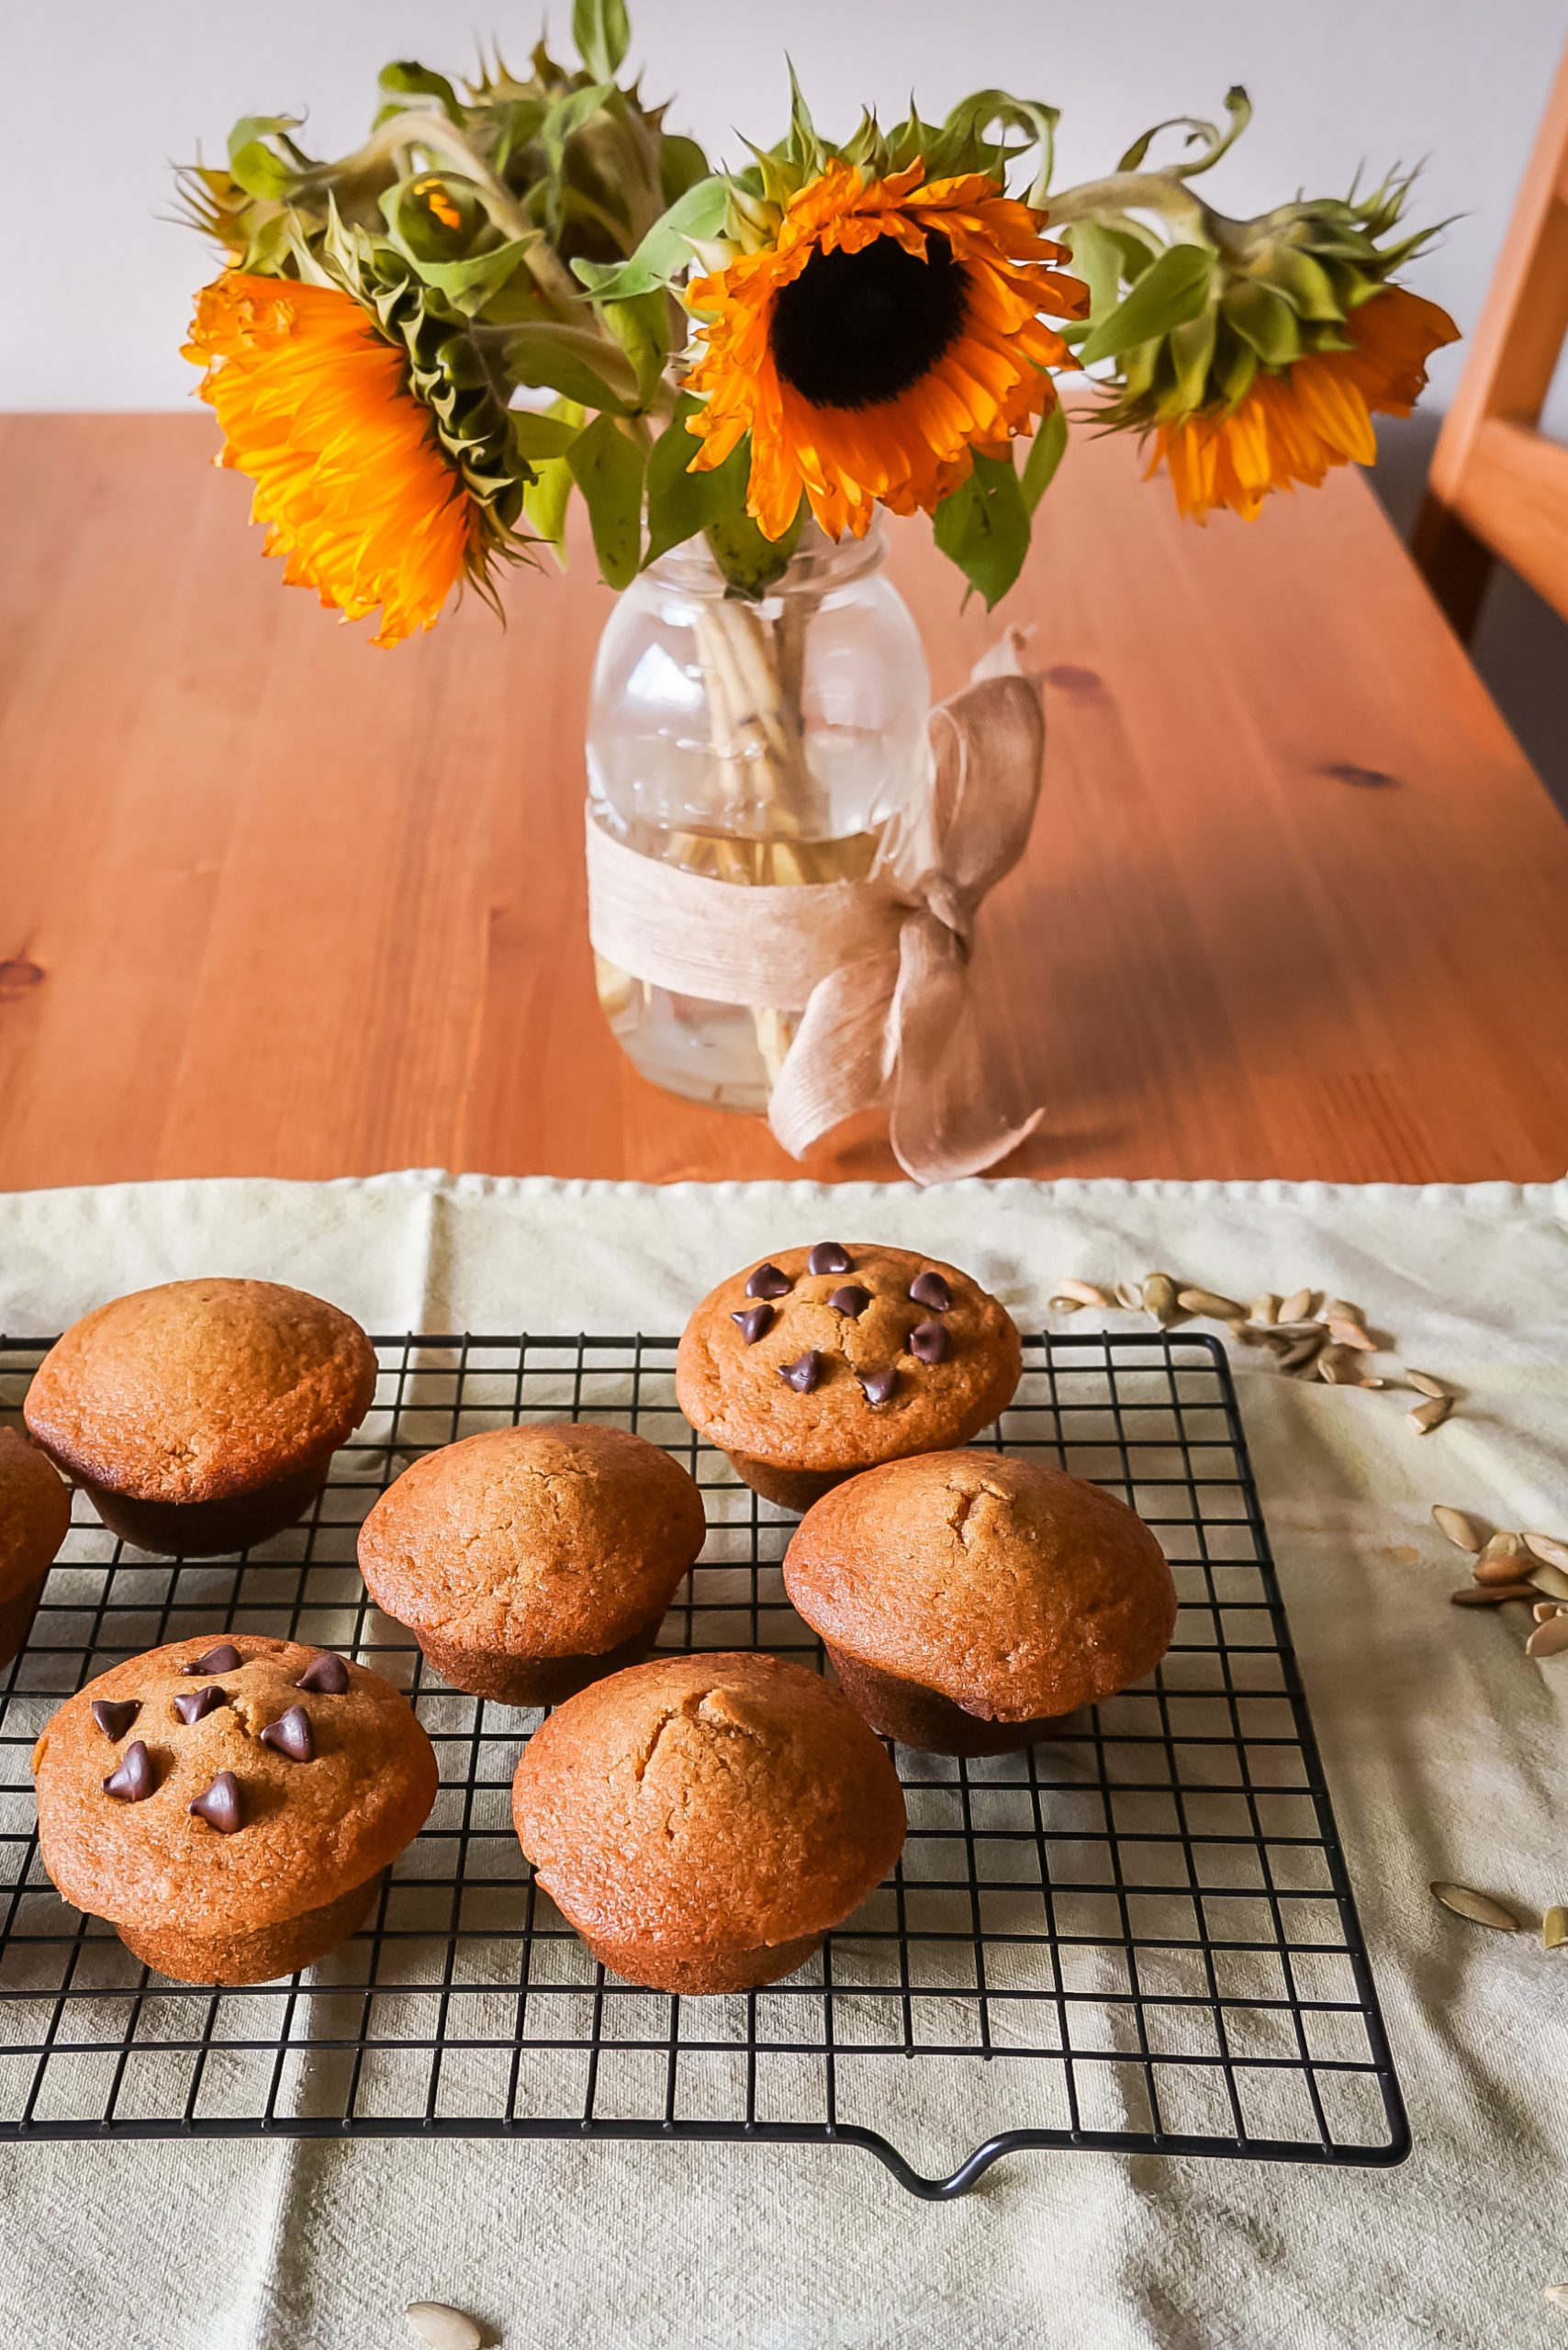 Side view of a cooling rack of gluten-free pumpkin muffins sitting beside a vase of fresh sunflowers.